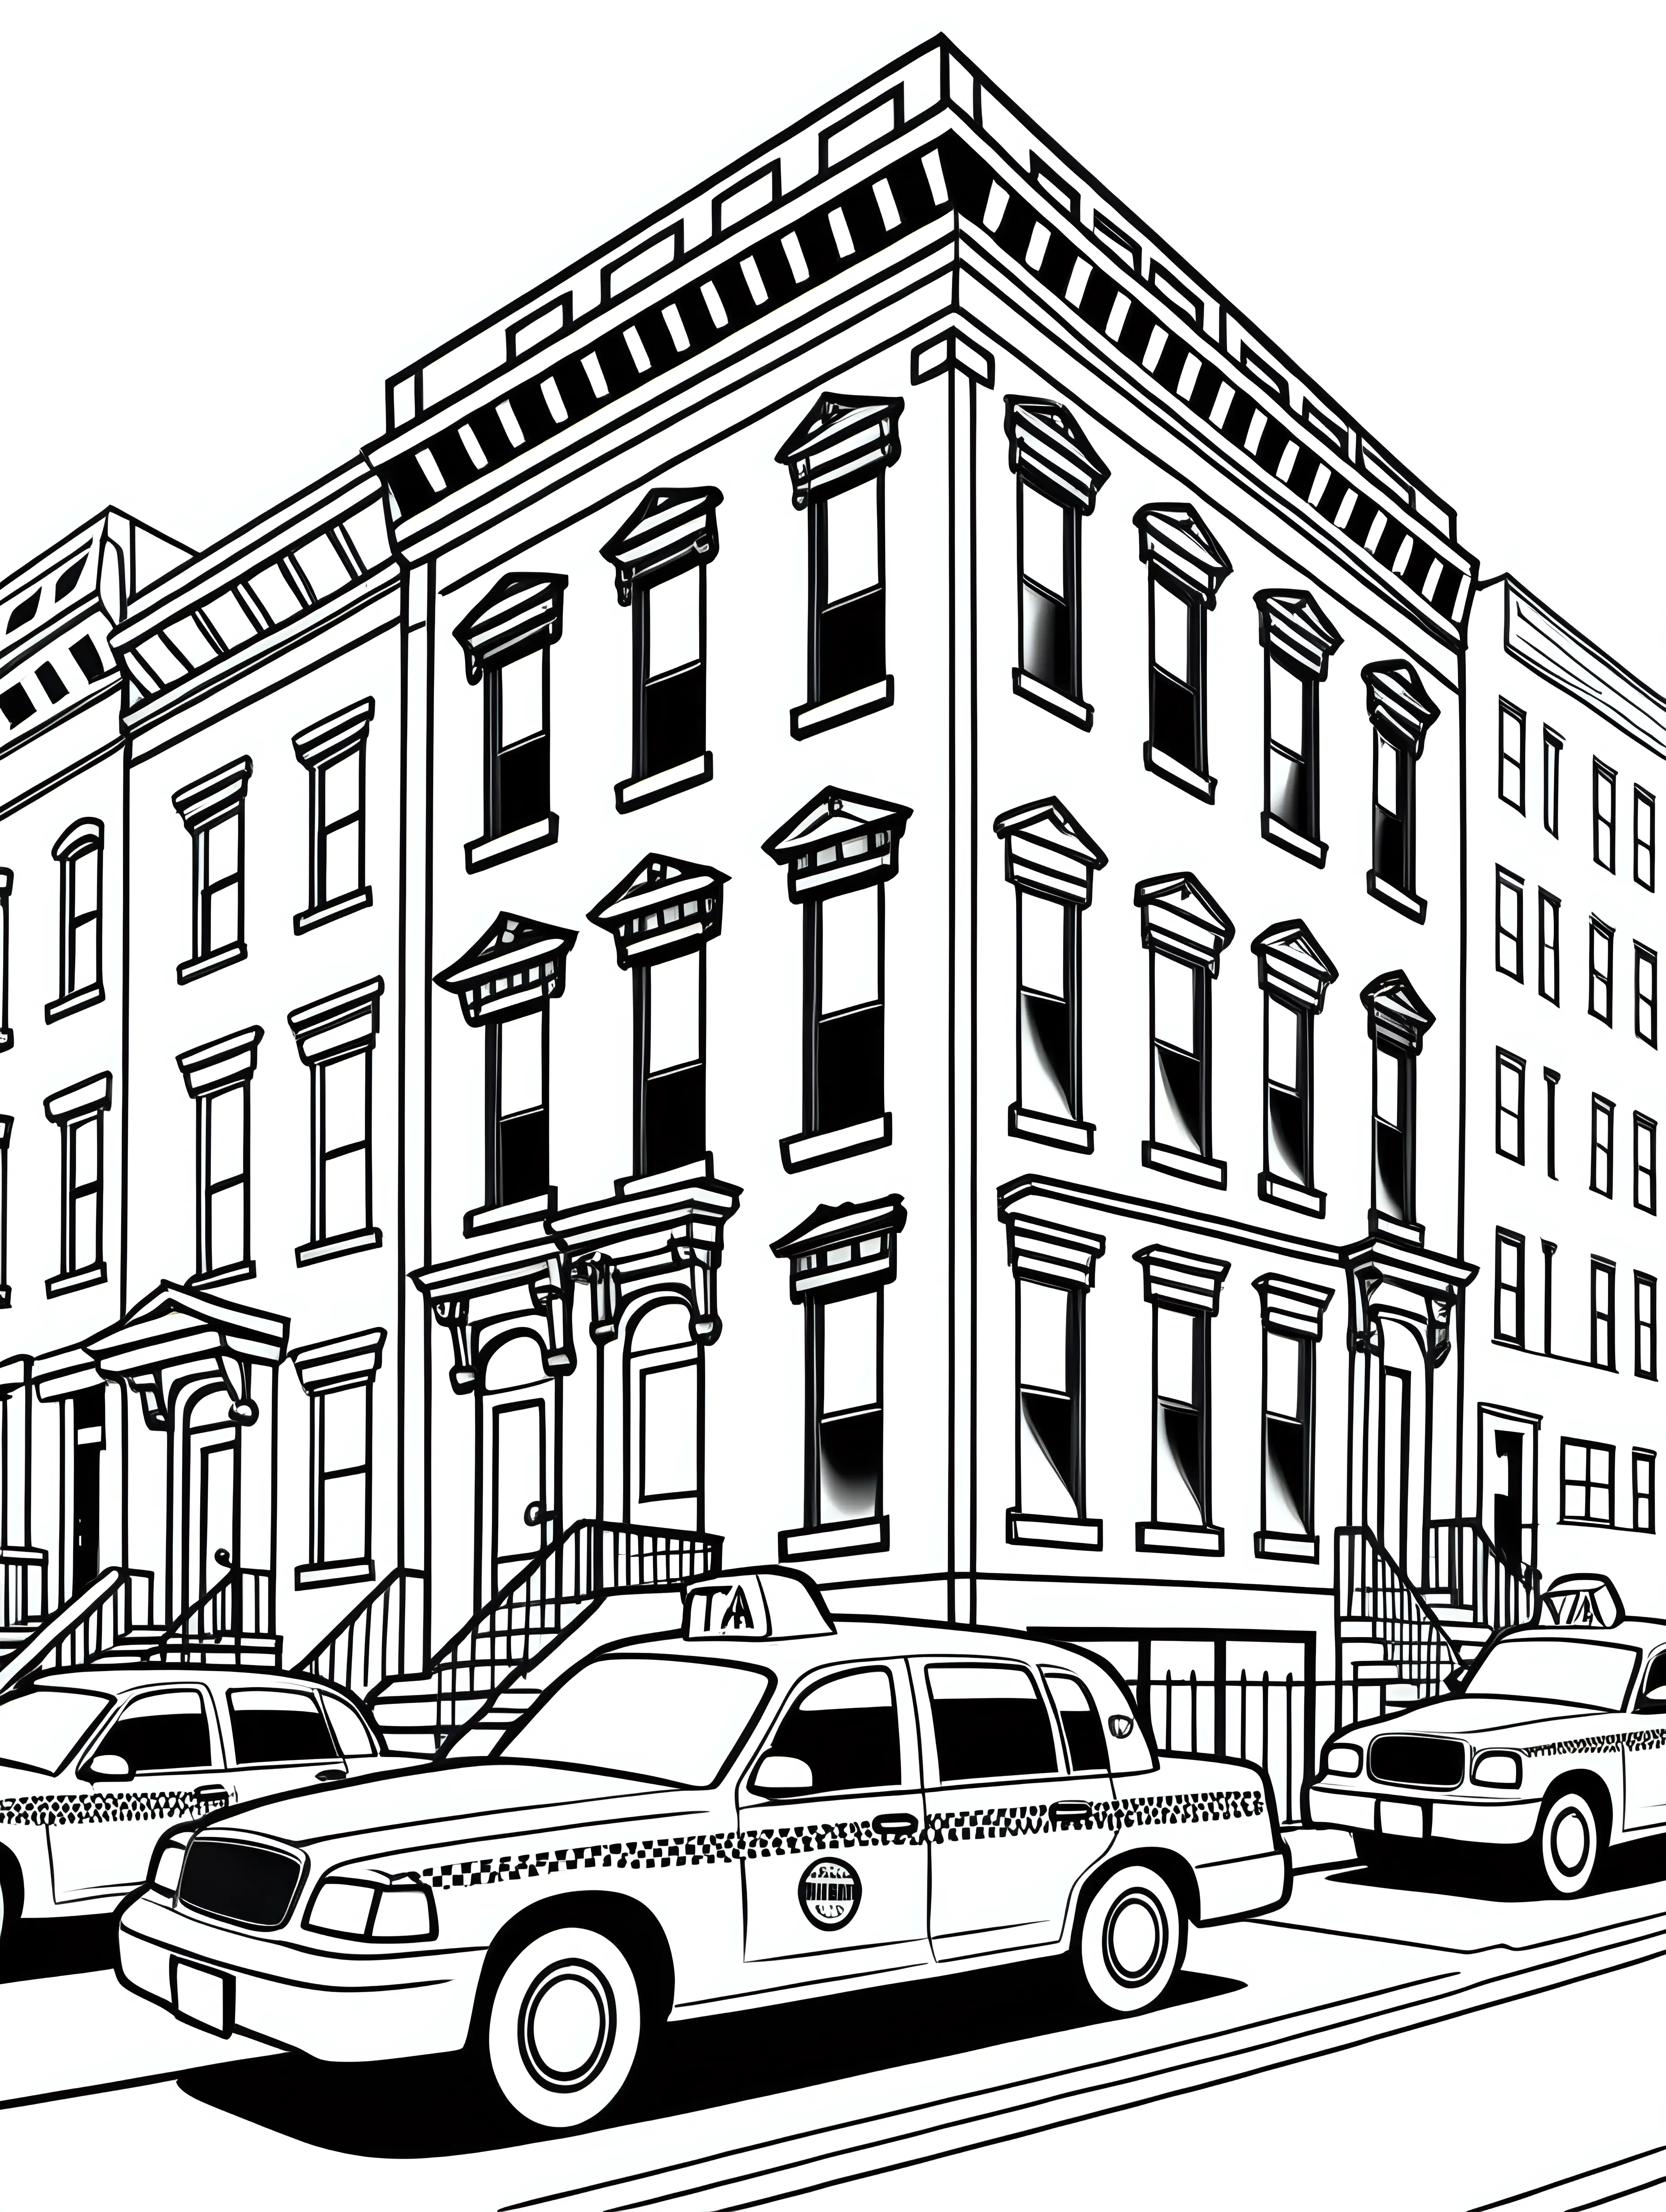 New York City Coloring Book Page with Townhouse and Taxi